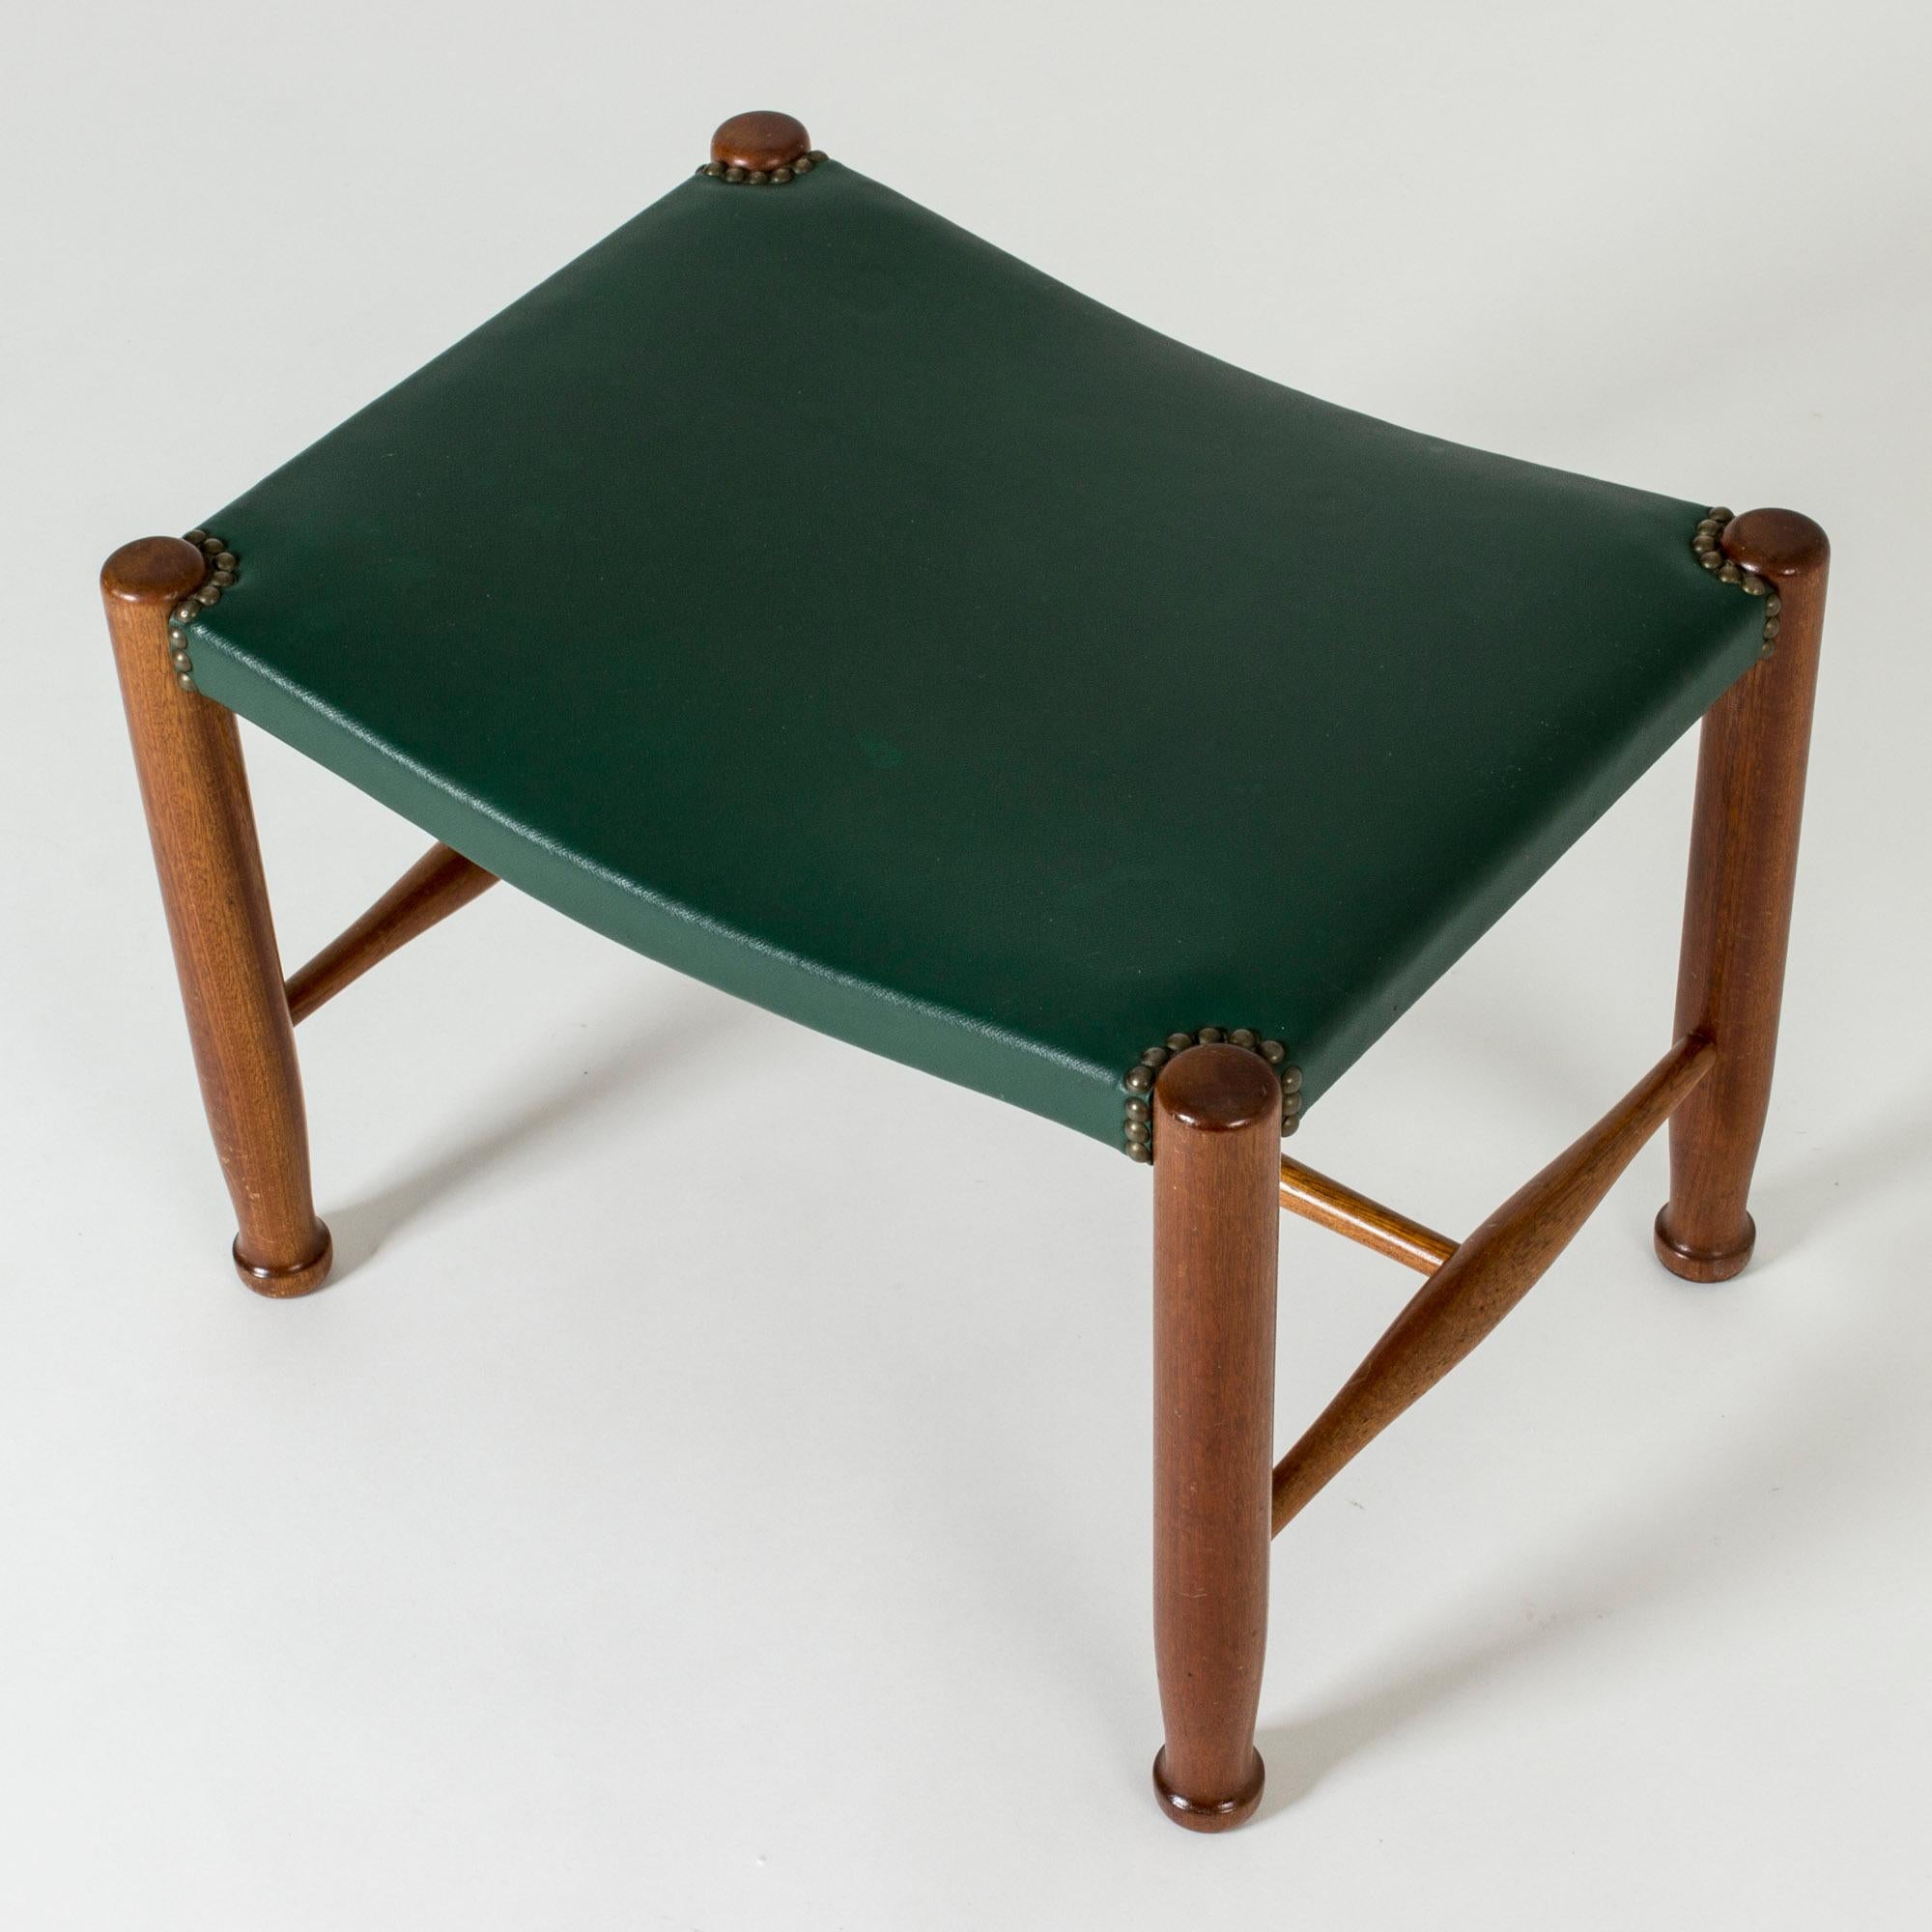 Neat stool by Josef Frank, made from mahogany with sculpted legs. Original green leather seat, with decorative nails around the joinery of the legs.